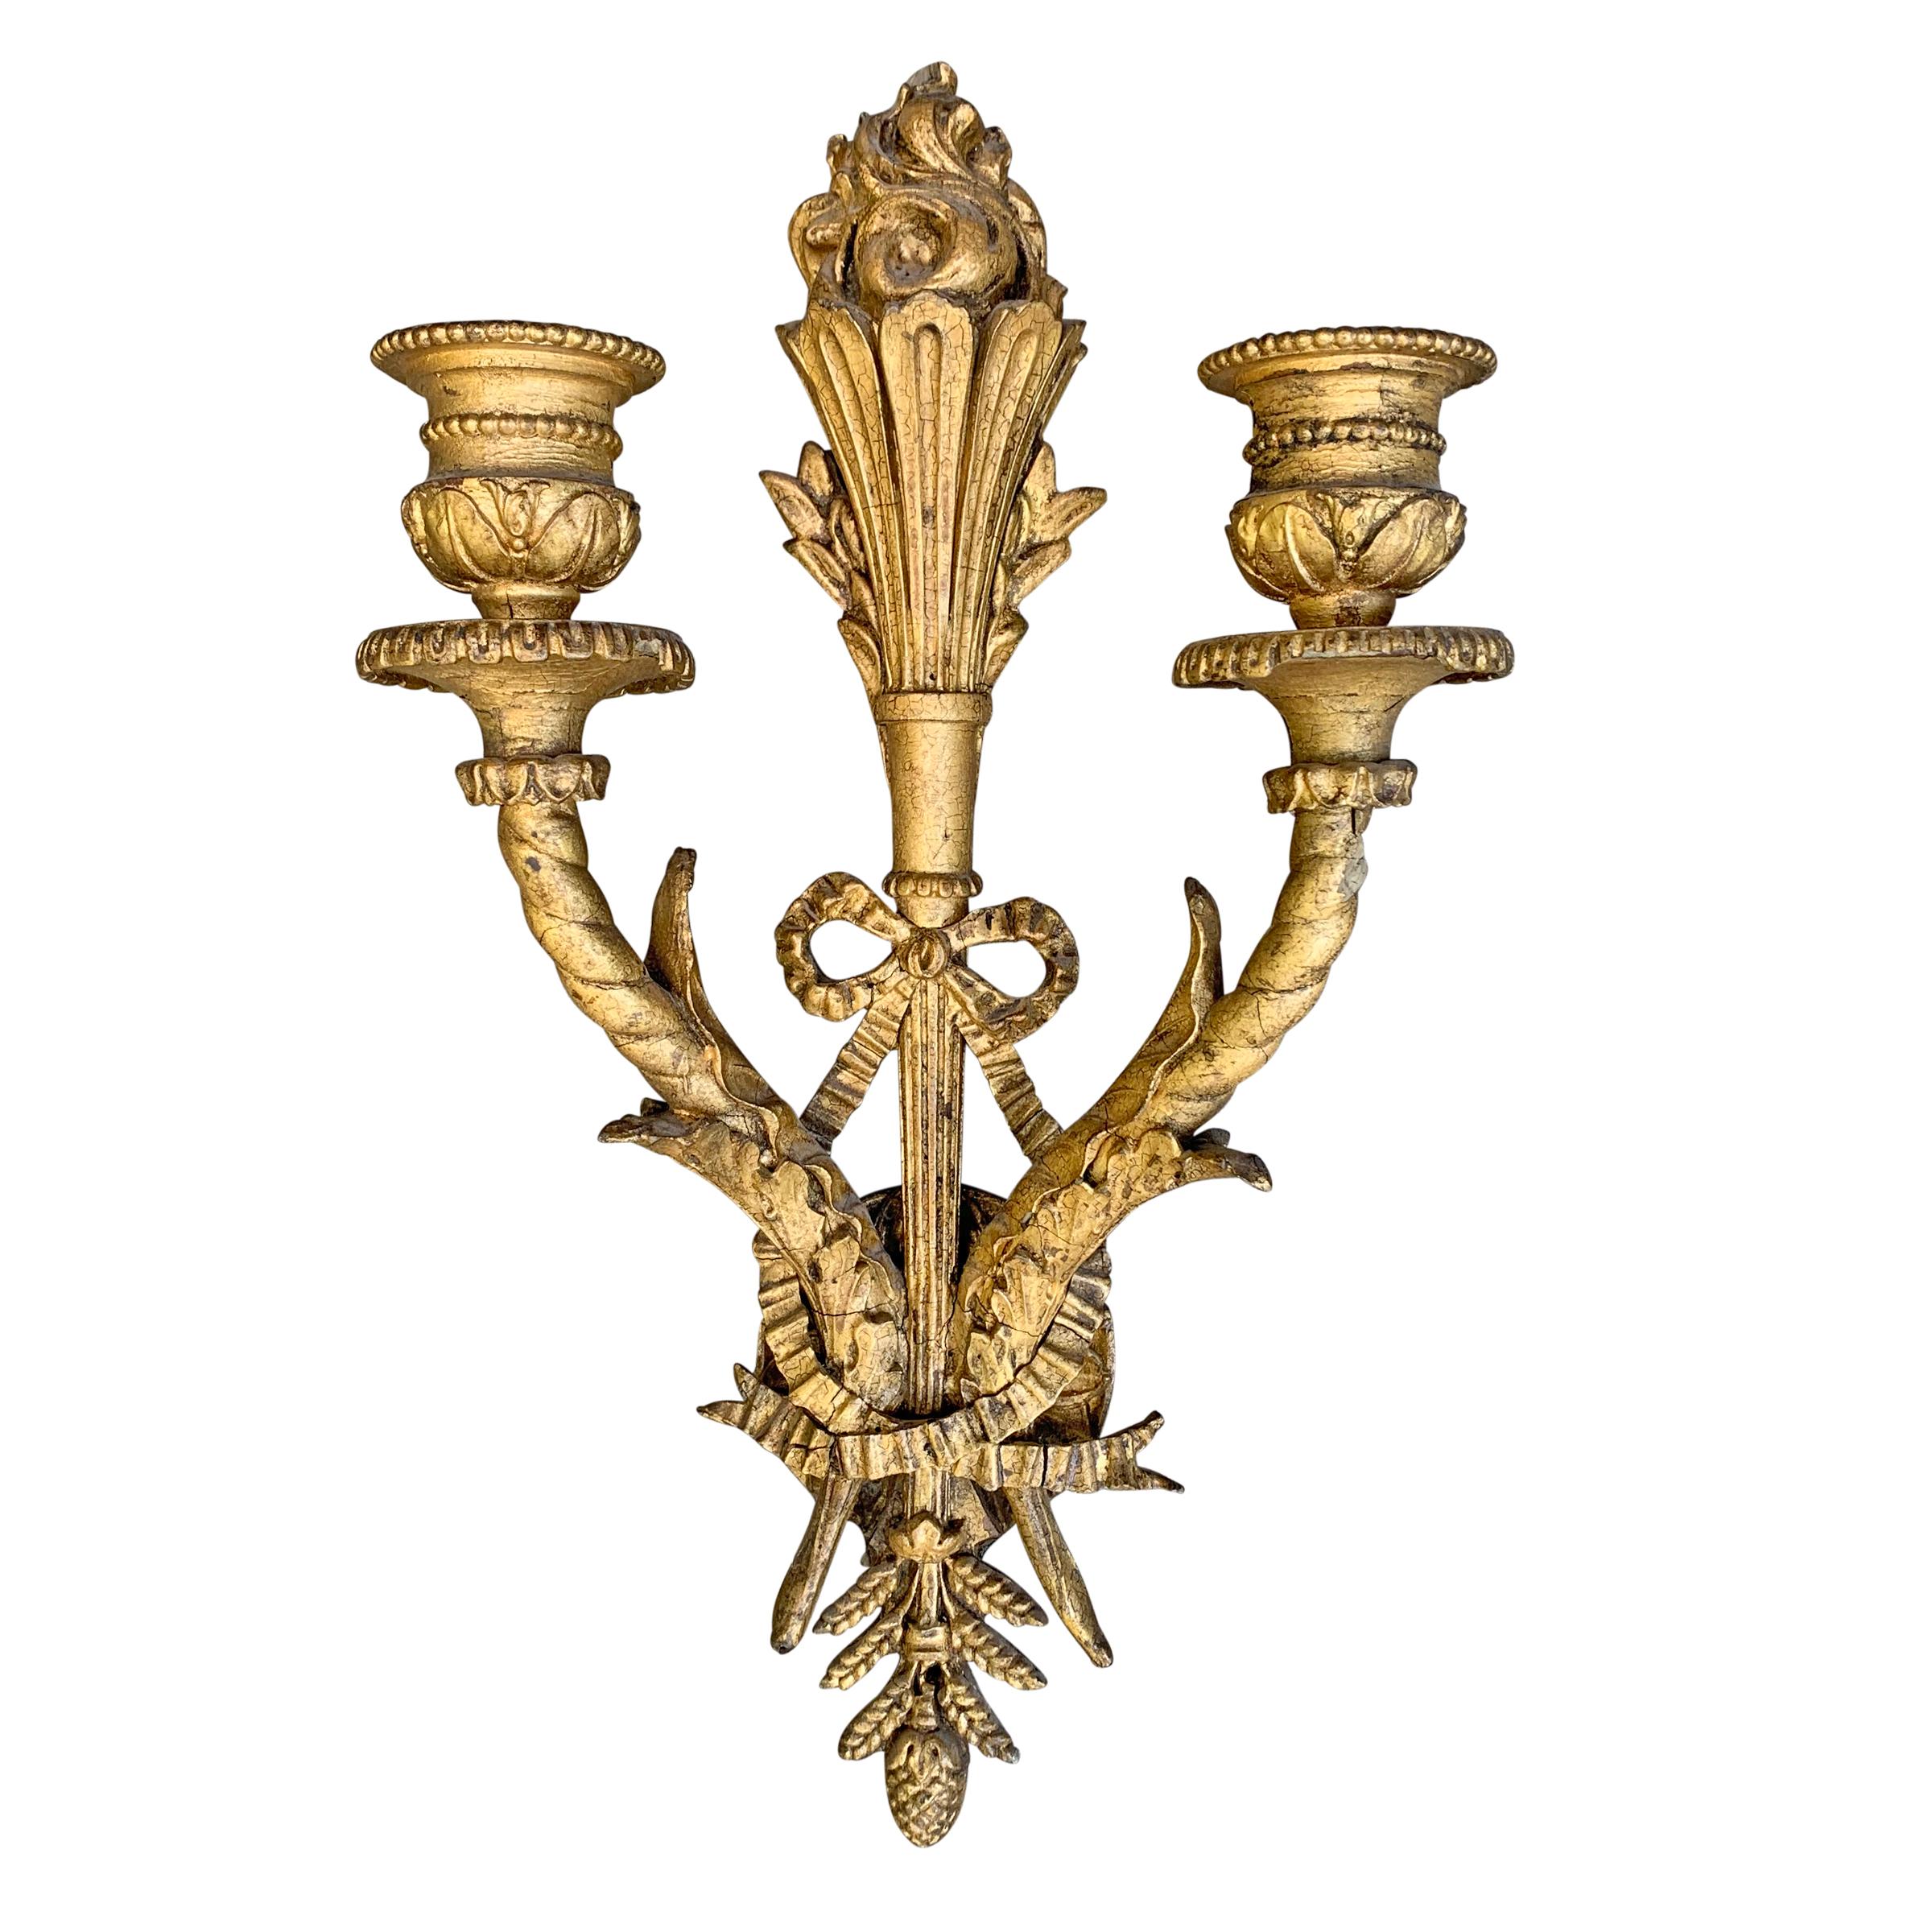 A pair of wonderful 19th century French giltwood and composition sconces with a central torch holding a large flame and two scrolled arms with acanthus leaves and a bow and ribbon. Lights were once electrified, but will need to be rewired for use.